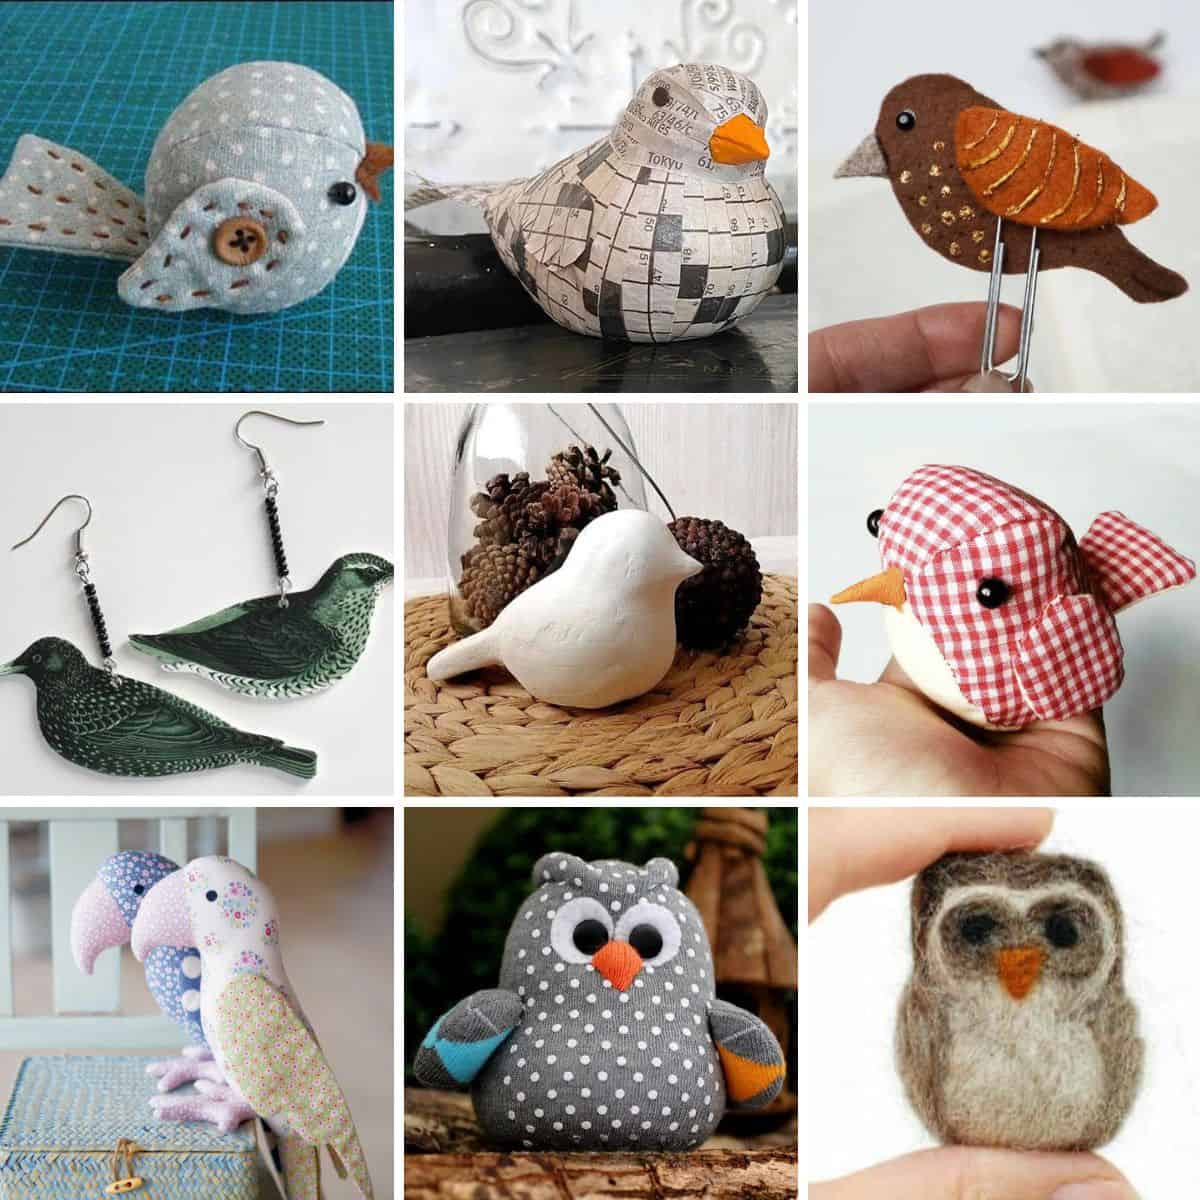 Over 25 Creative Yarn Crafts for Adults